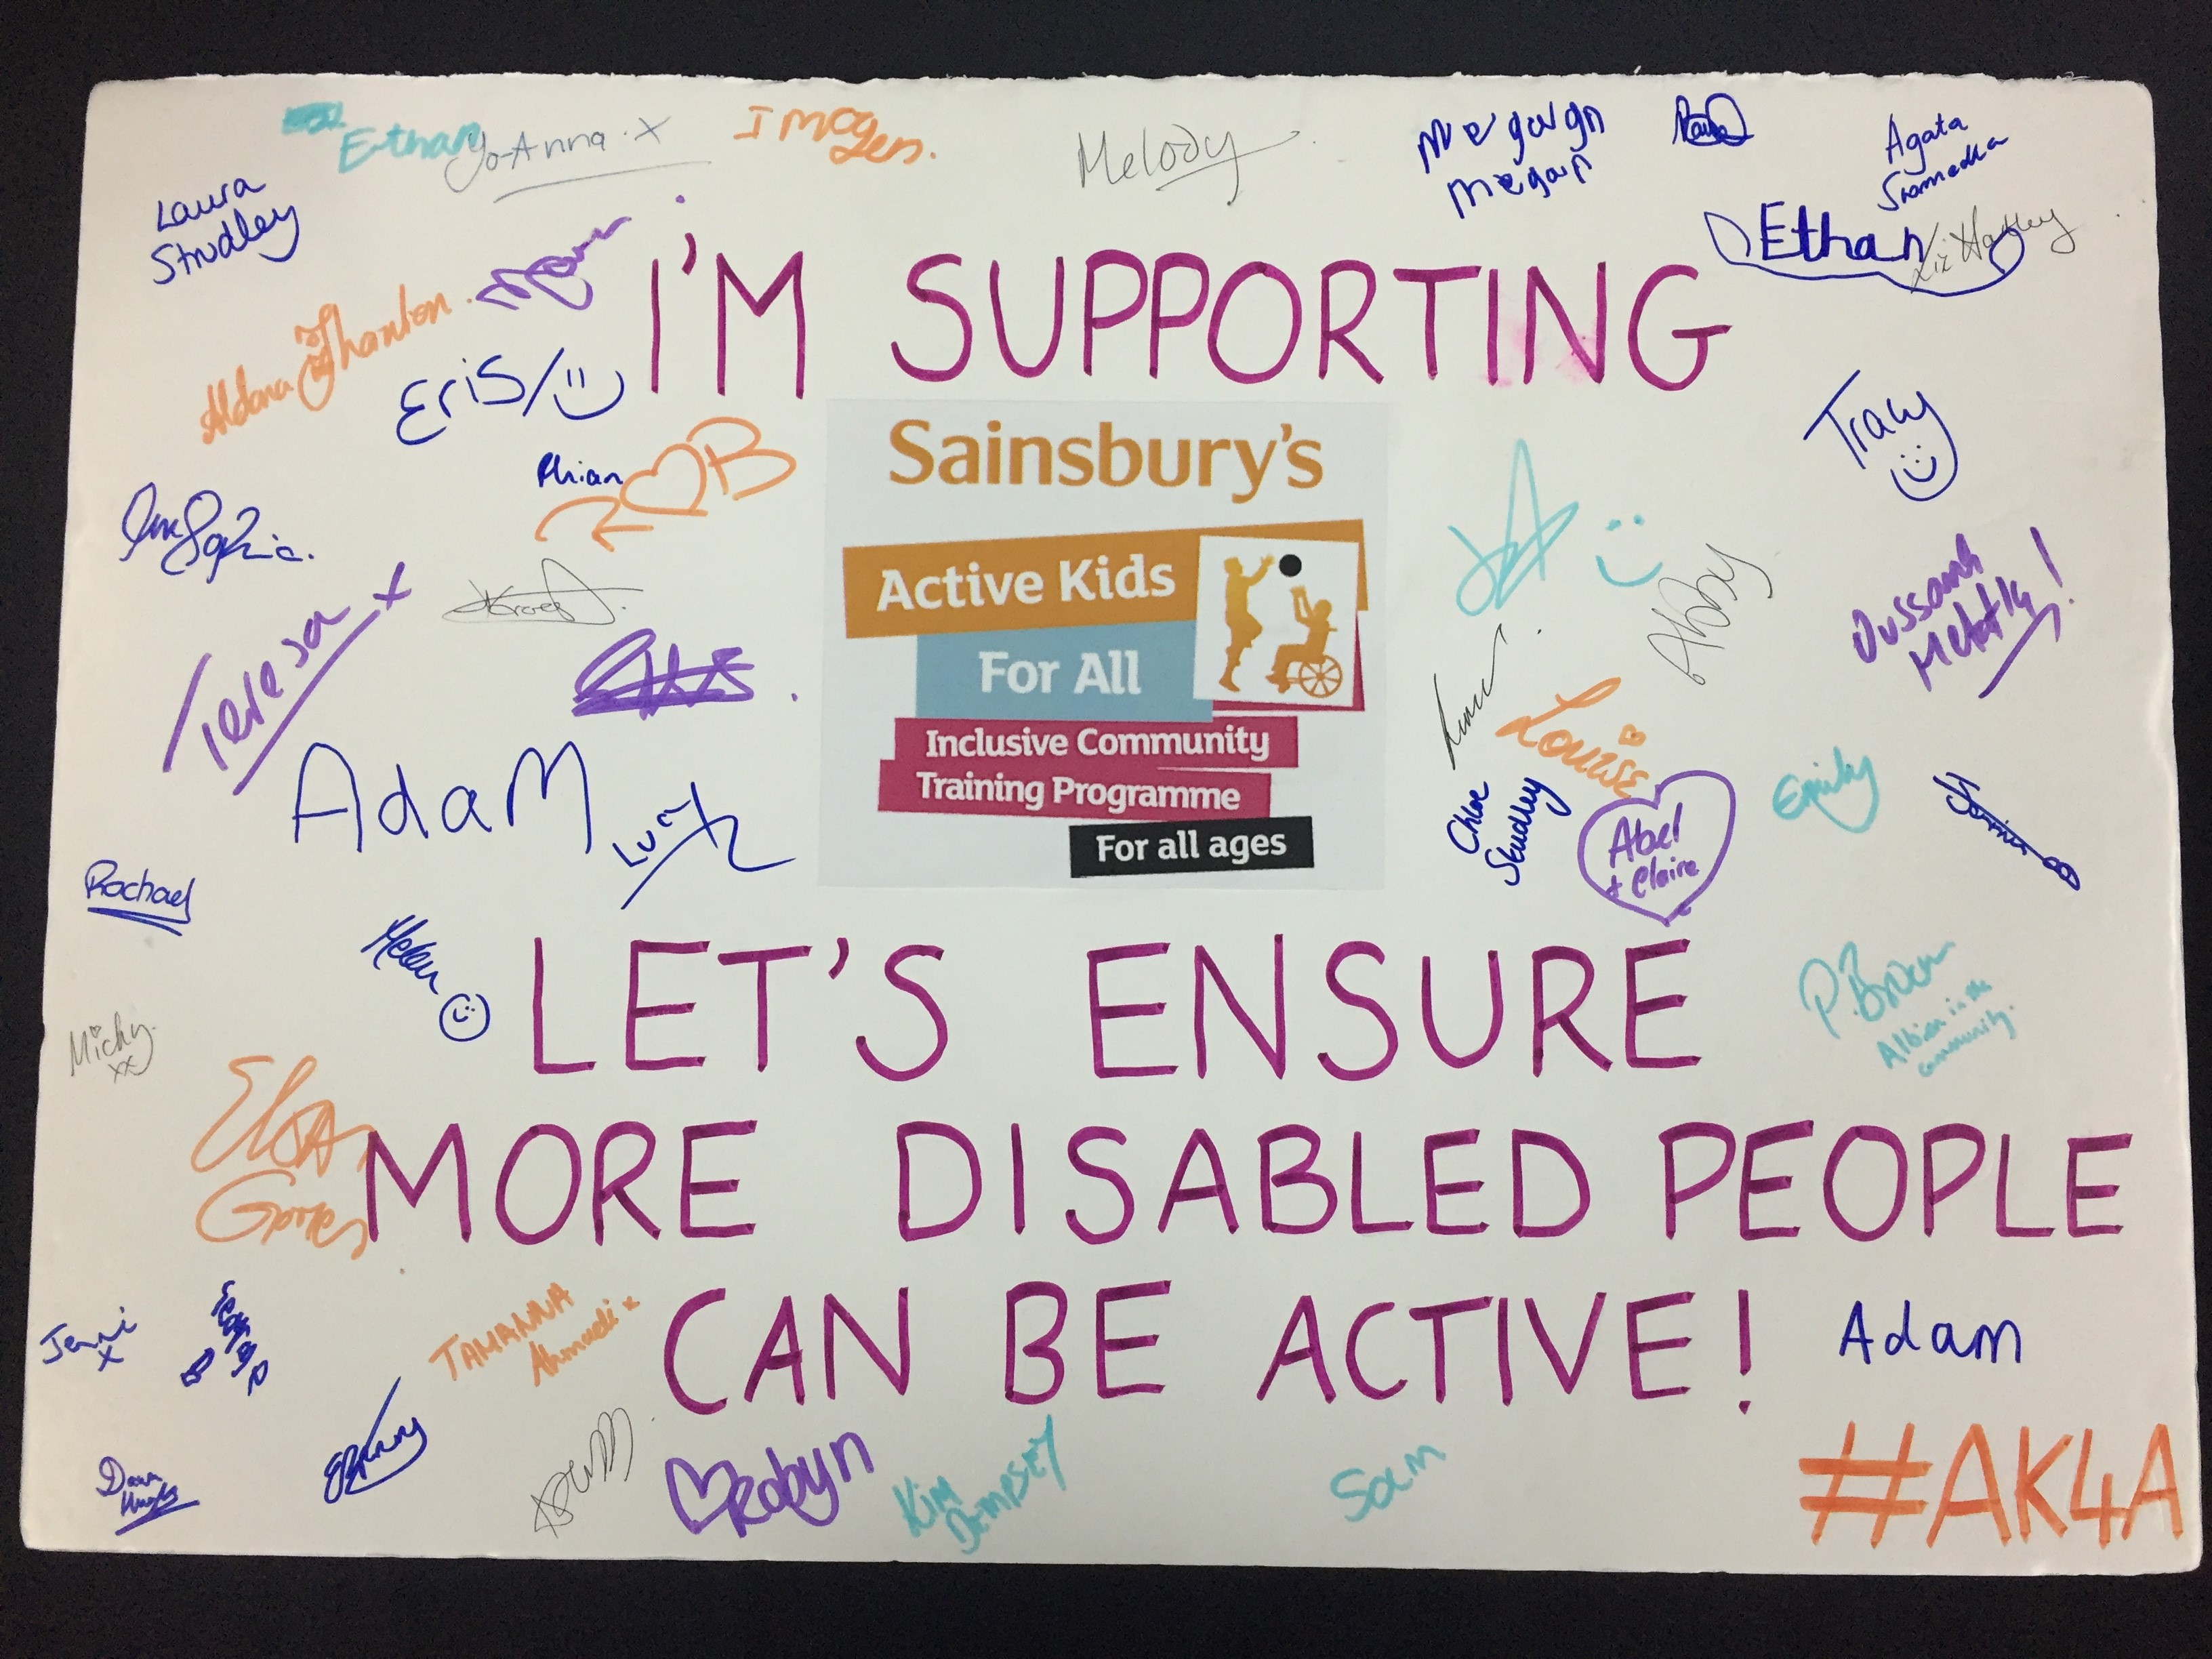 Signed pledge board reading 'Let's ensure more disabled people can be active!"